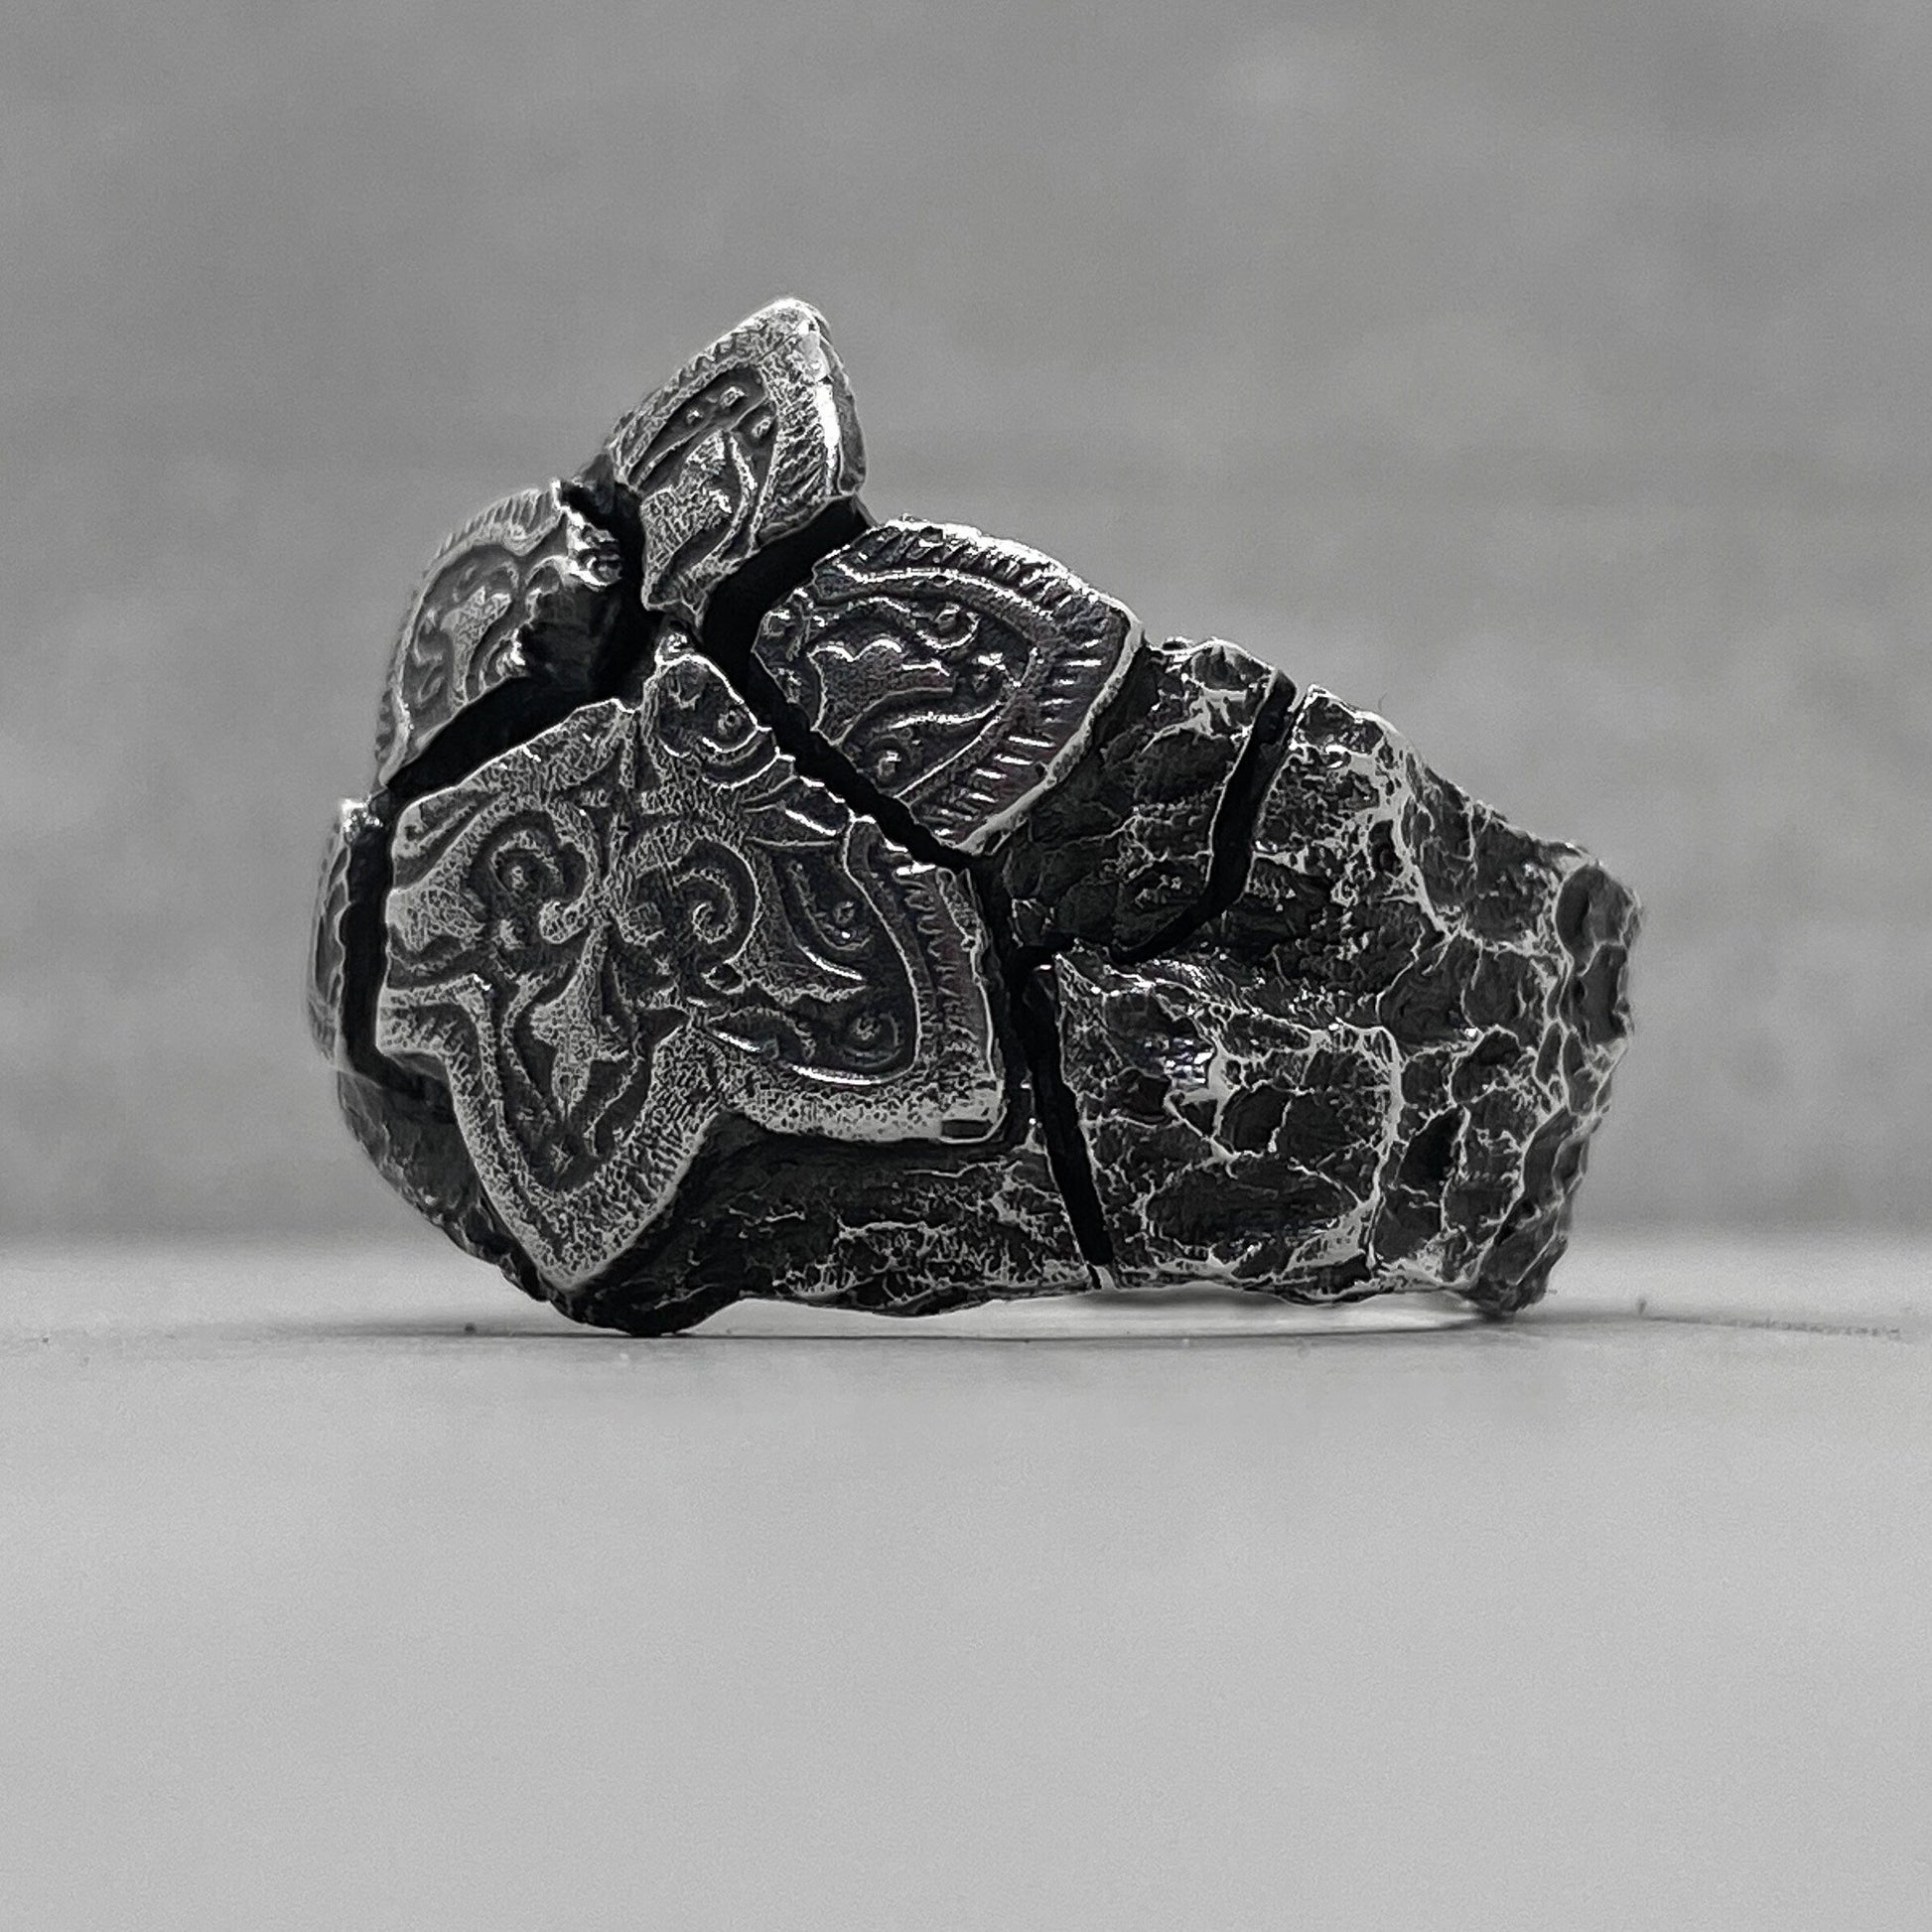 Mosaic ring - unusual ring with an oriental pattern and cracks Rings with cracks and patterns Project50g 